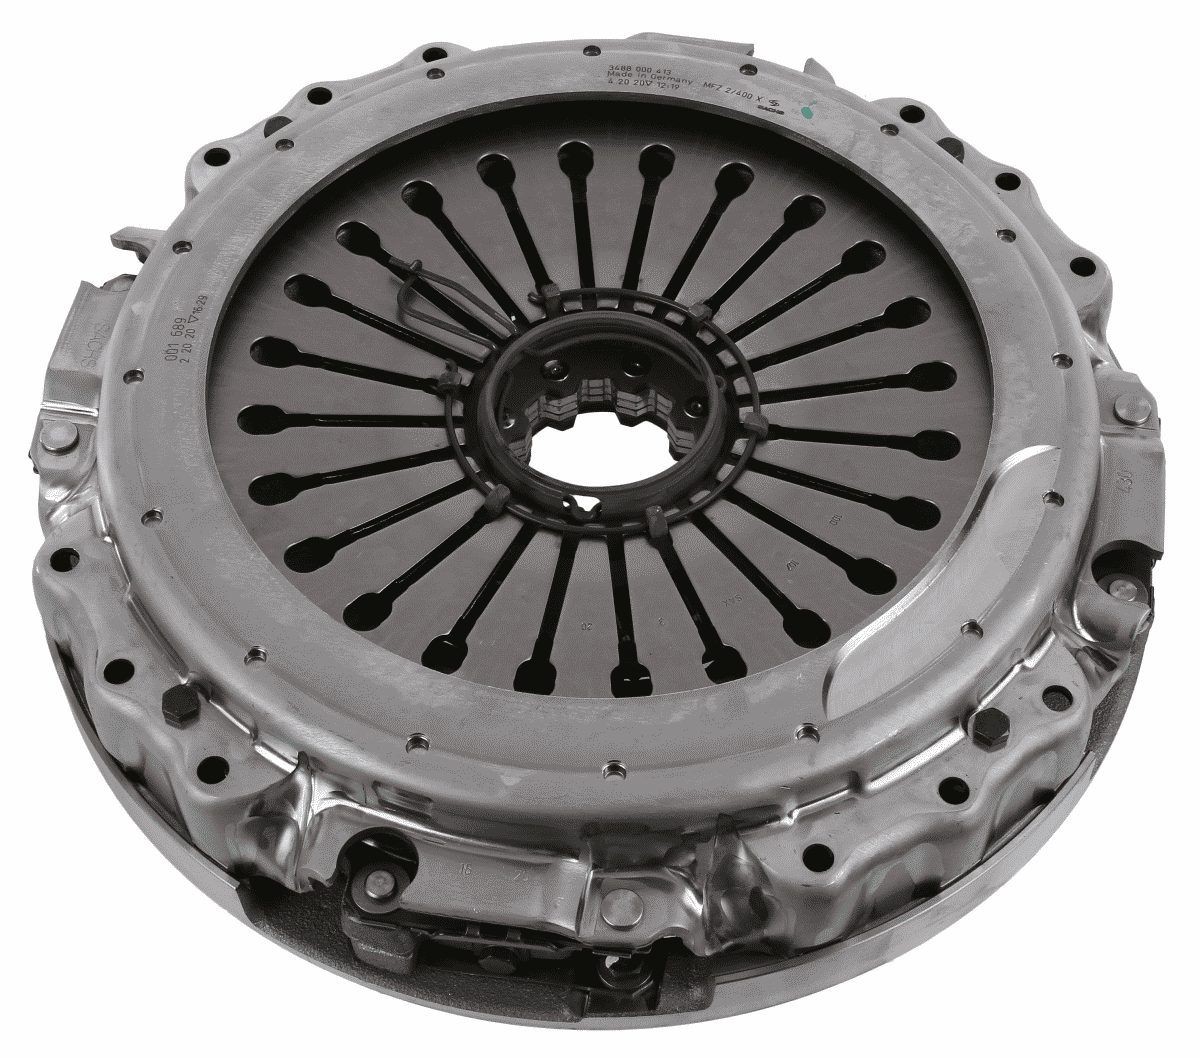 SACHS contains a clutch disc Clutch cover 3488 000 413 buy